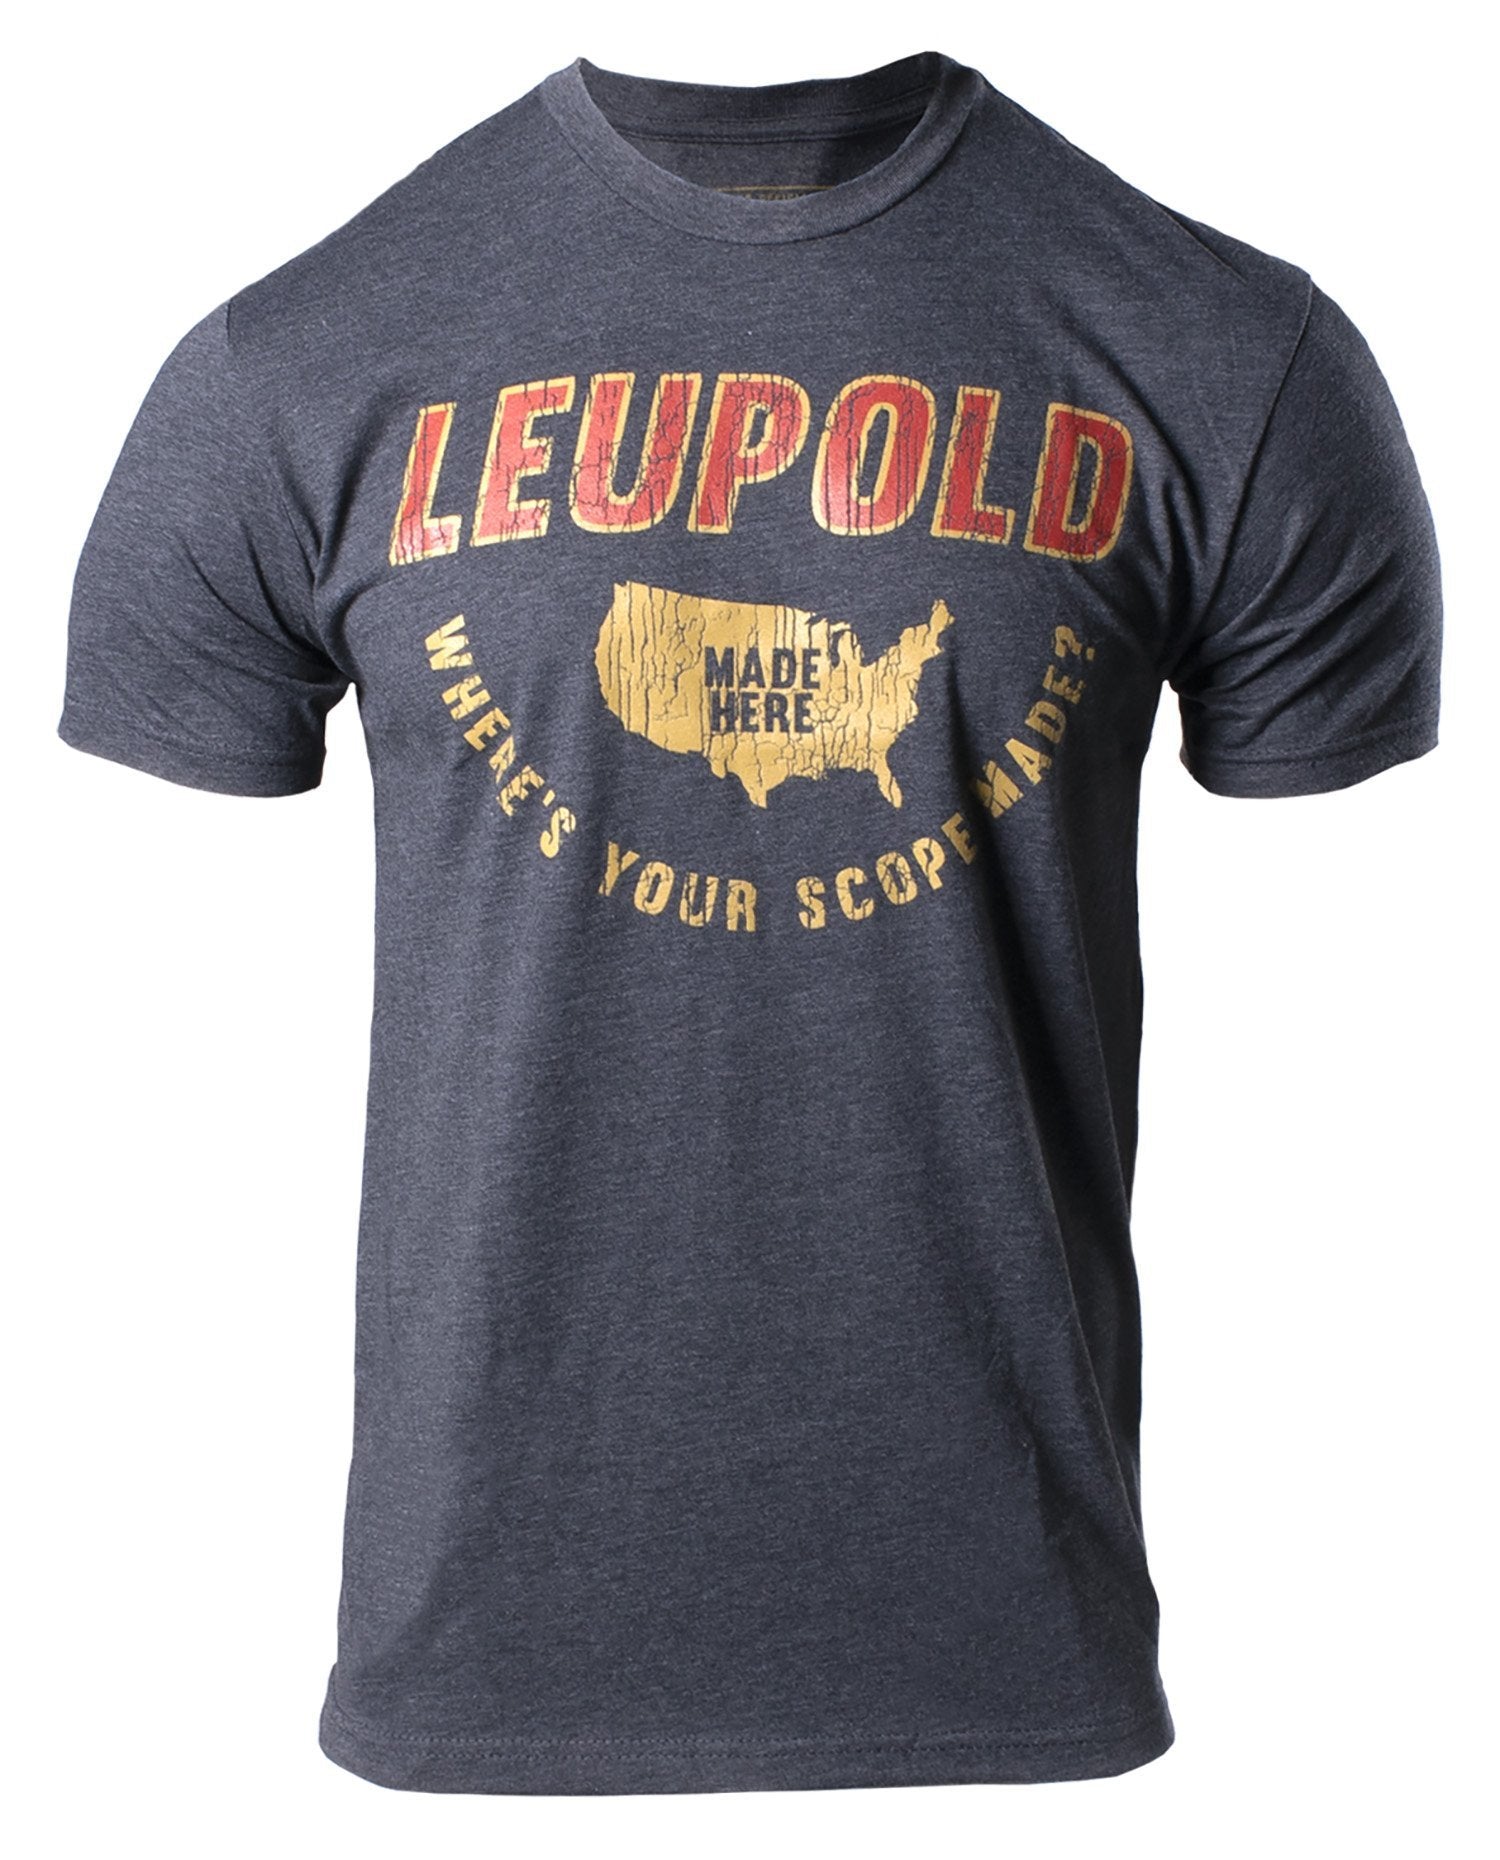 Leupold Made Here T-Shirt Charcoal Heather Large Short Sleeve - Pacific Flyway Supplies